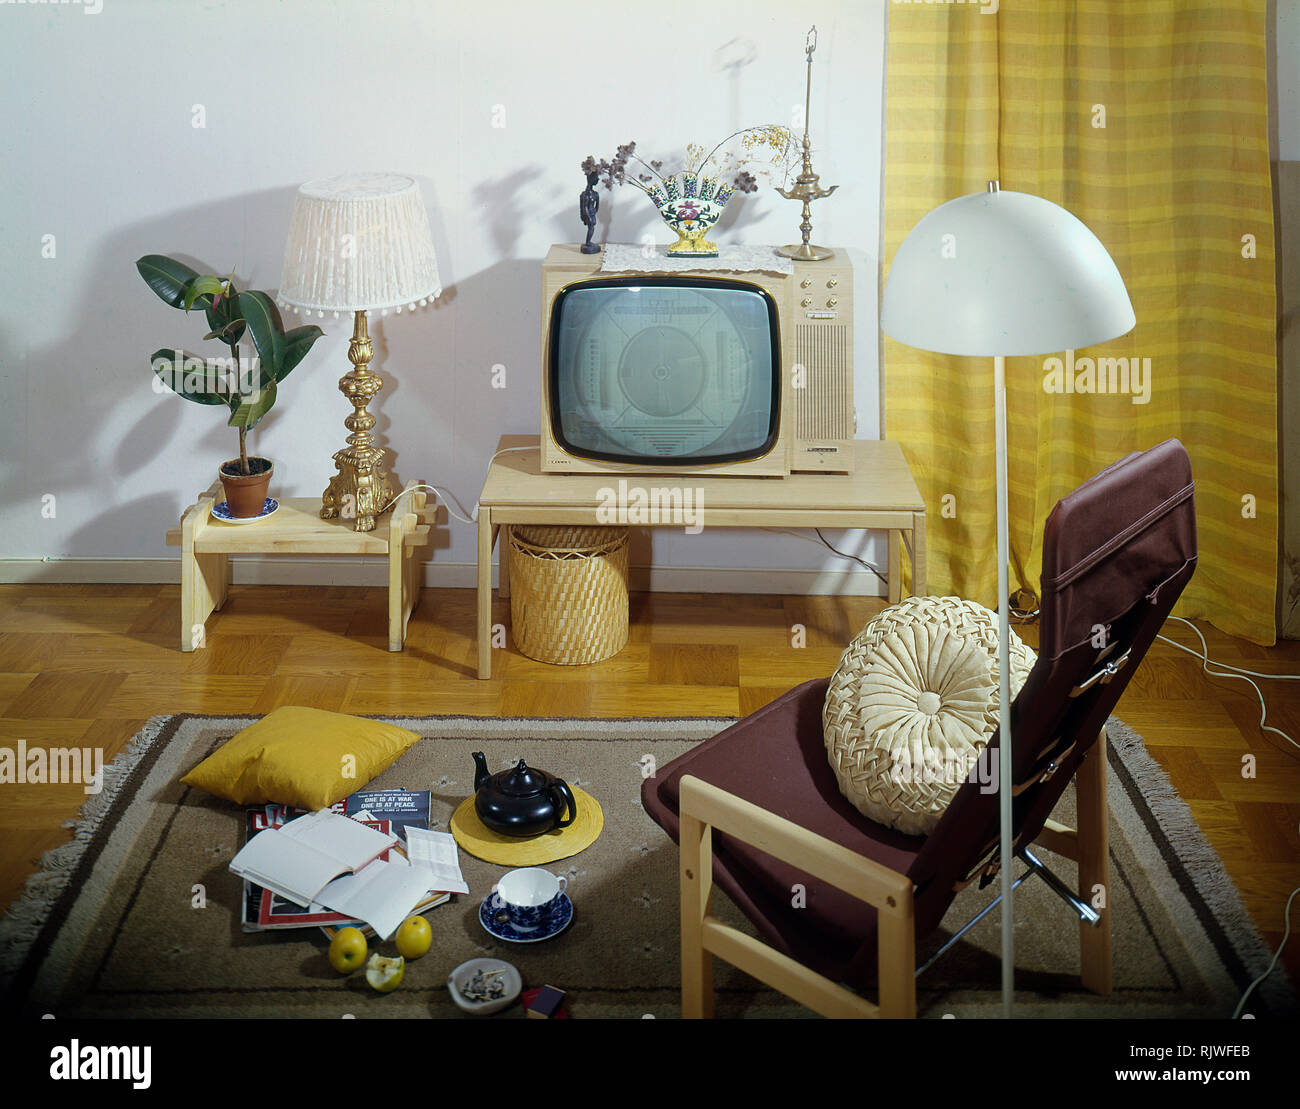 Television In The 1960s Interior From A Room With A Typical 1960s Television Set On A Special Tv Furniture CV7 3 Sweden 1963 Stock Photo Alamy